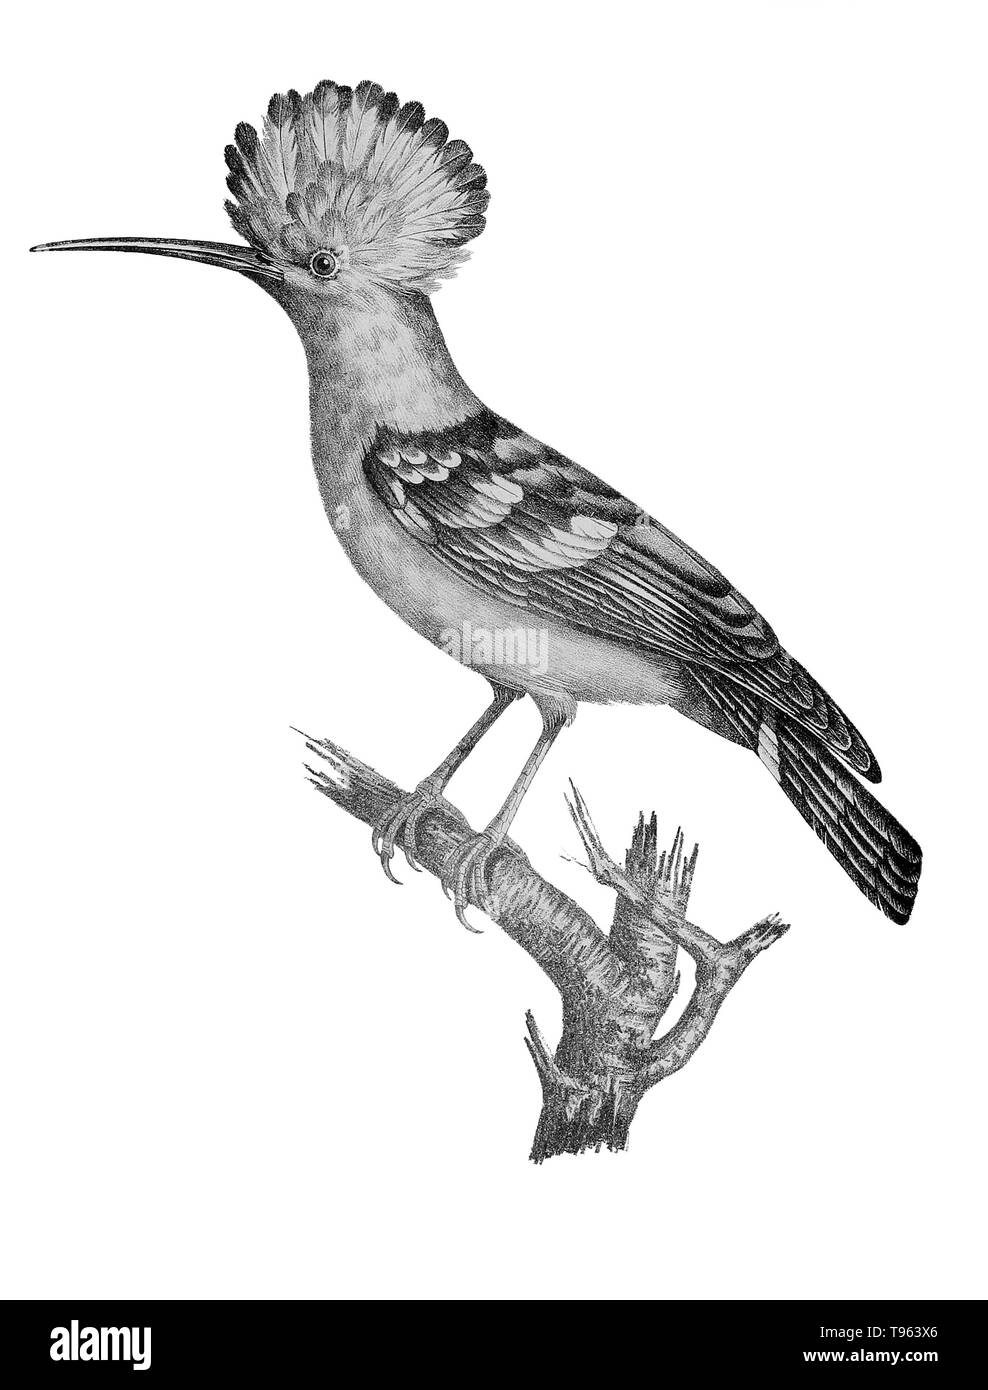 African Hoopoe from La galerie des oiseaux du Cabinet d'histoire naturelle du Jardin du roi, 1834 edition, written by Louis Pierre Vieillot, with plates by Paul Louis Oudart. The hoopoes have recently been split into three species, including the African hoopoe (Upupa africana). Stock Photo